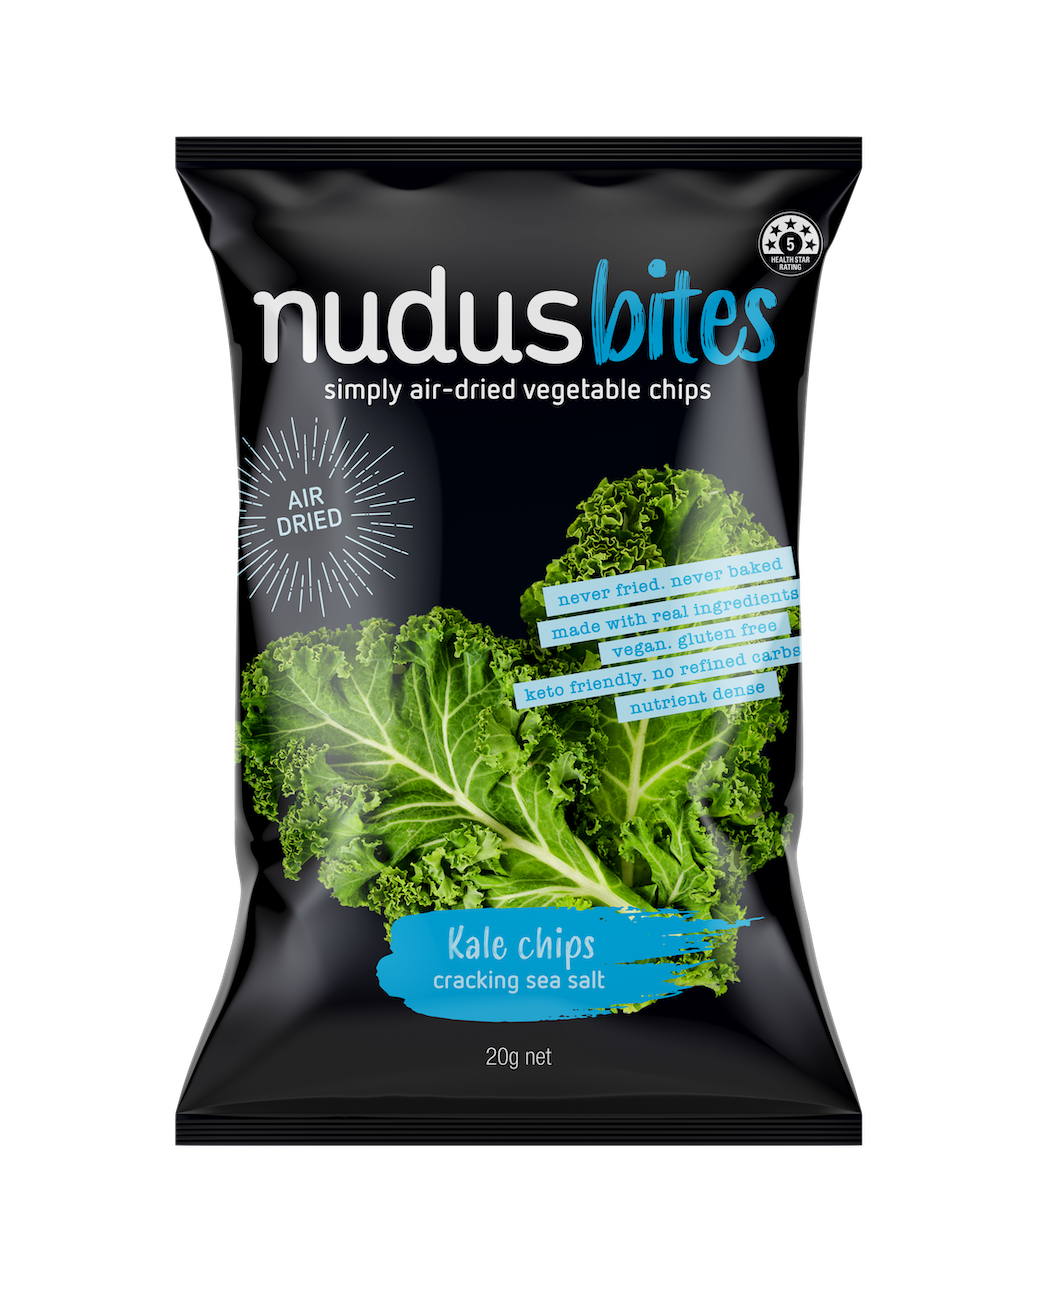 Our Favourites From Nudus Bites Kale & Zucchini Chips